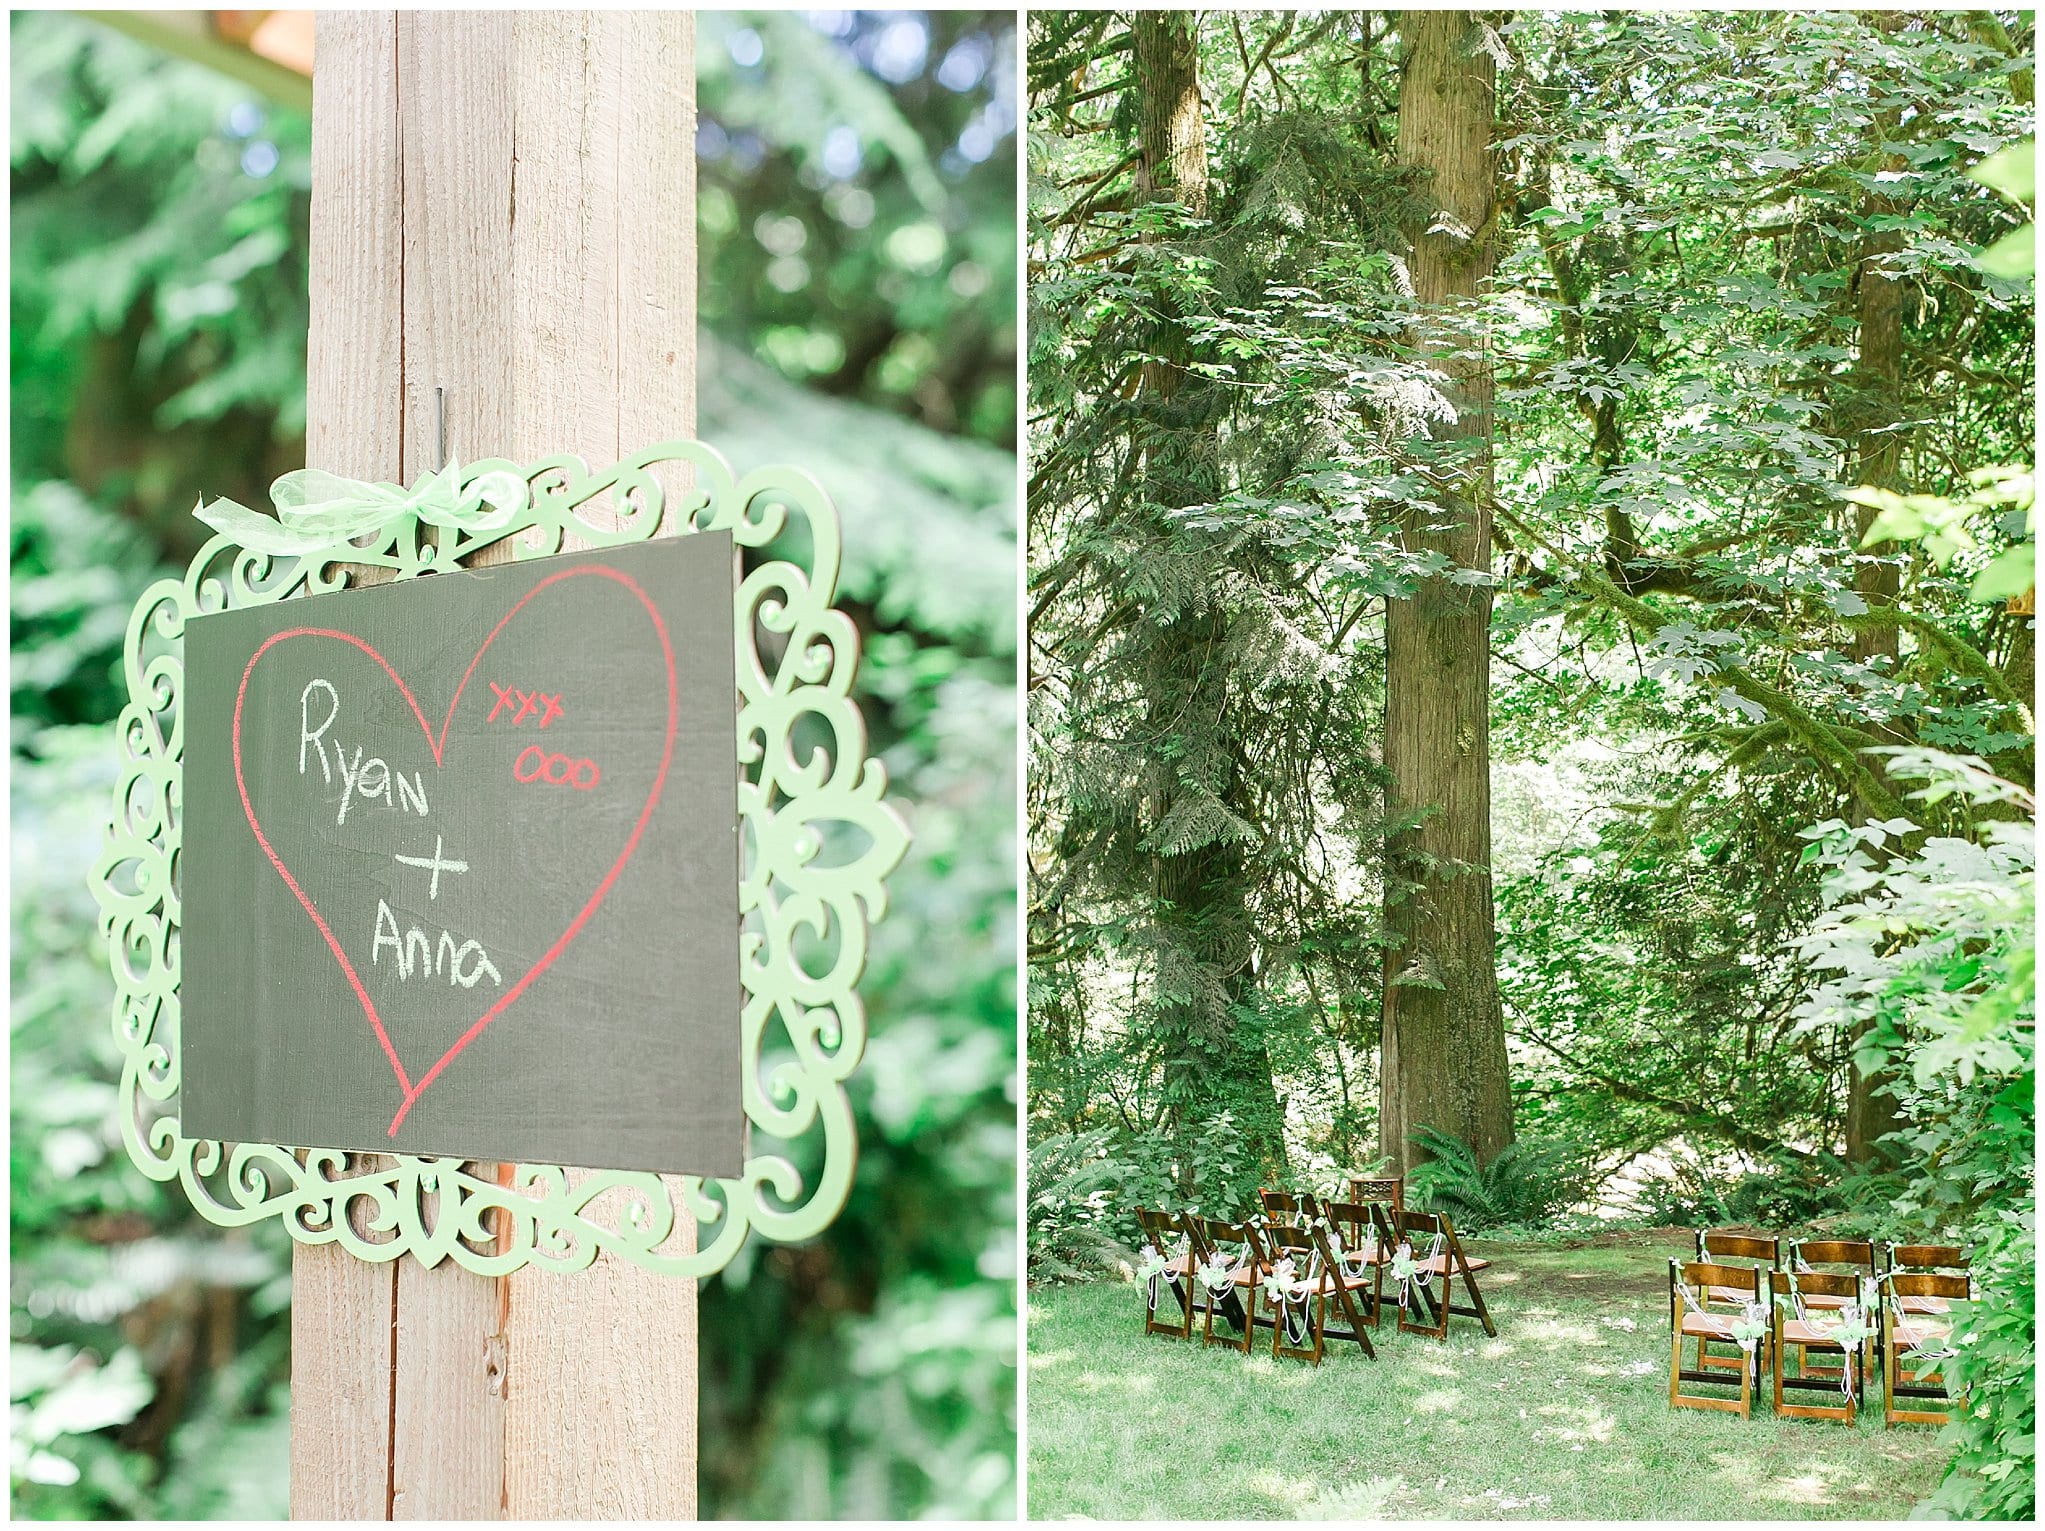 treehouse point wedding, treehouse point elopement, treehouse point photographer, treehouse wedding, elopement photographer